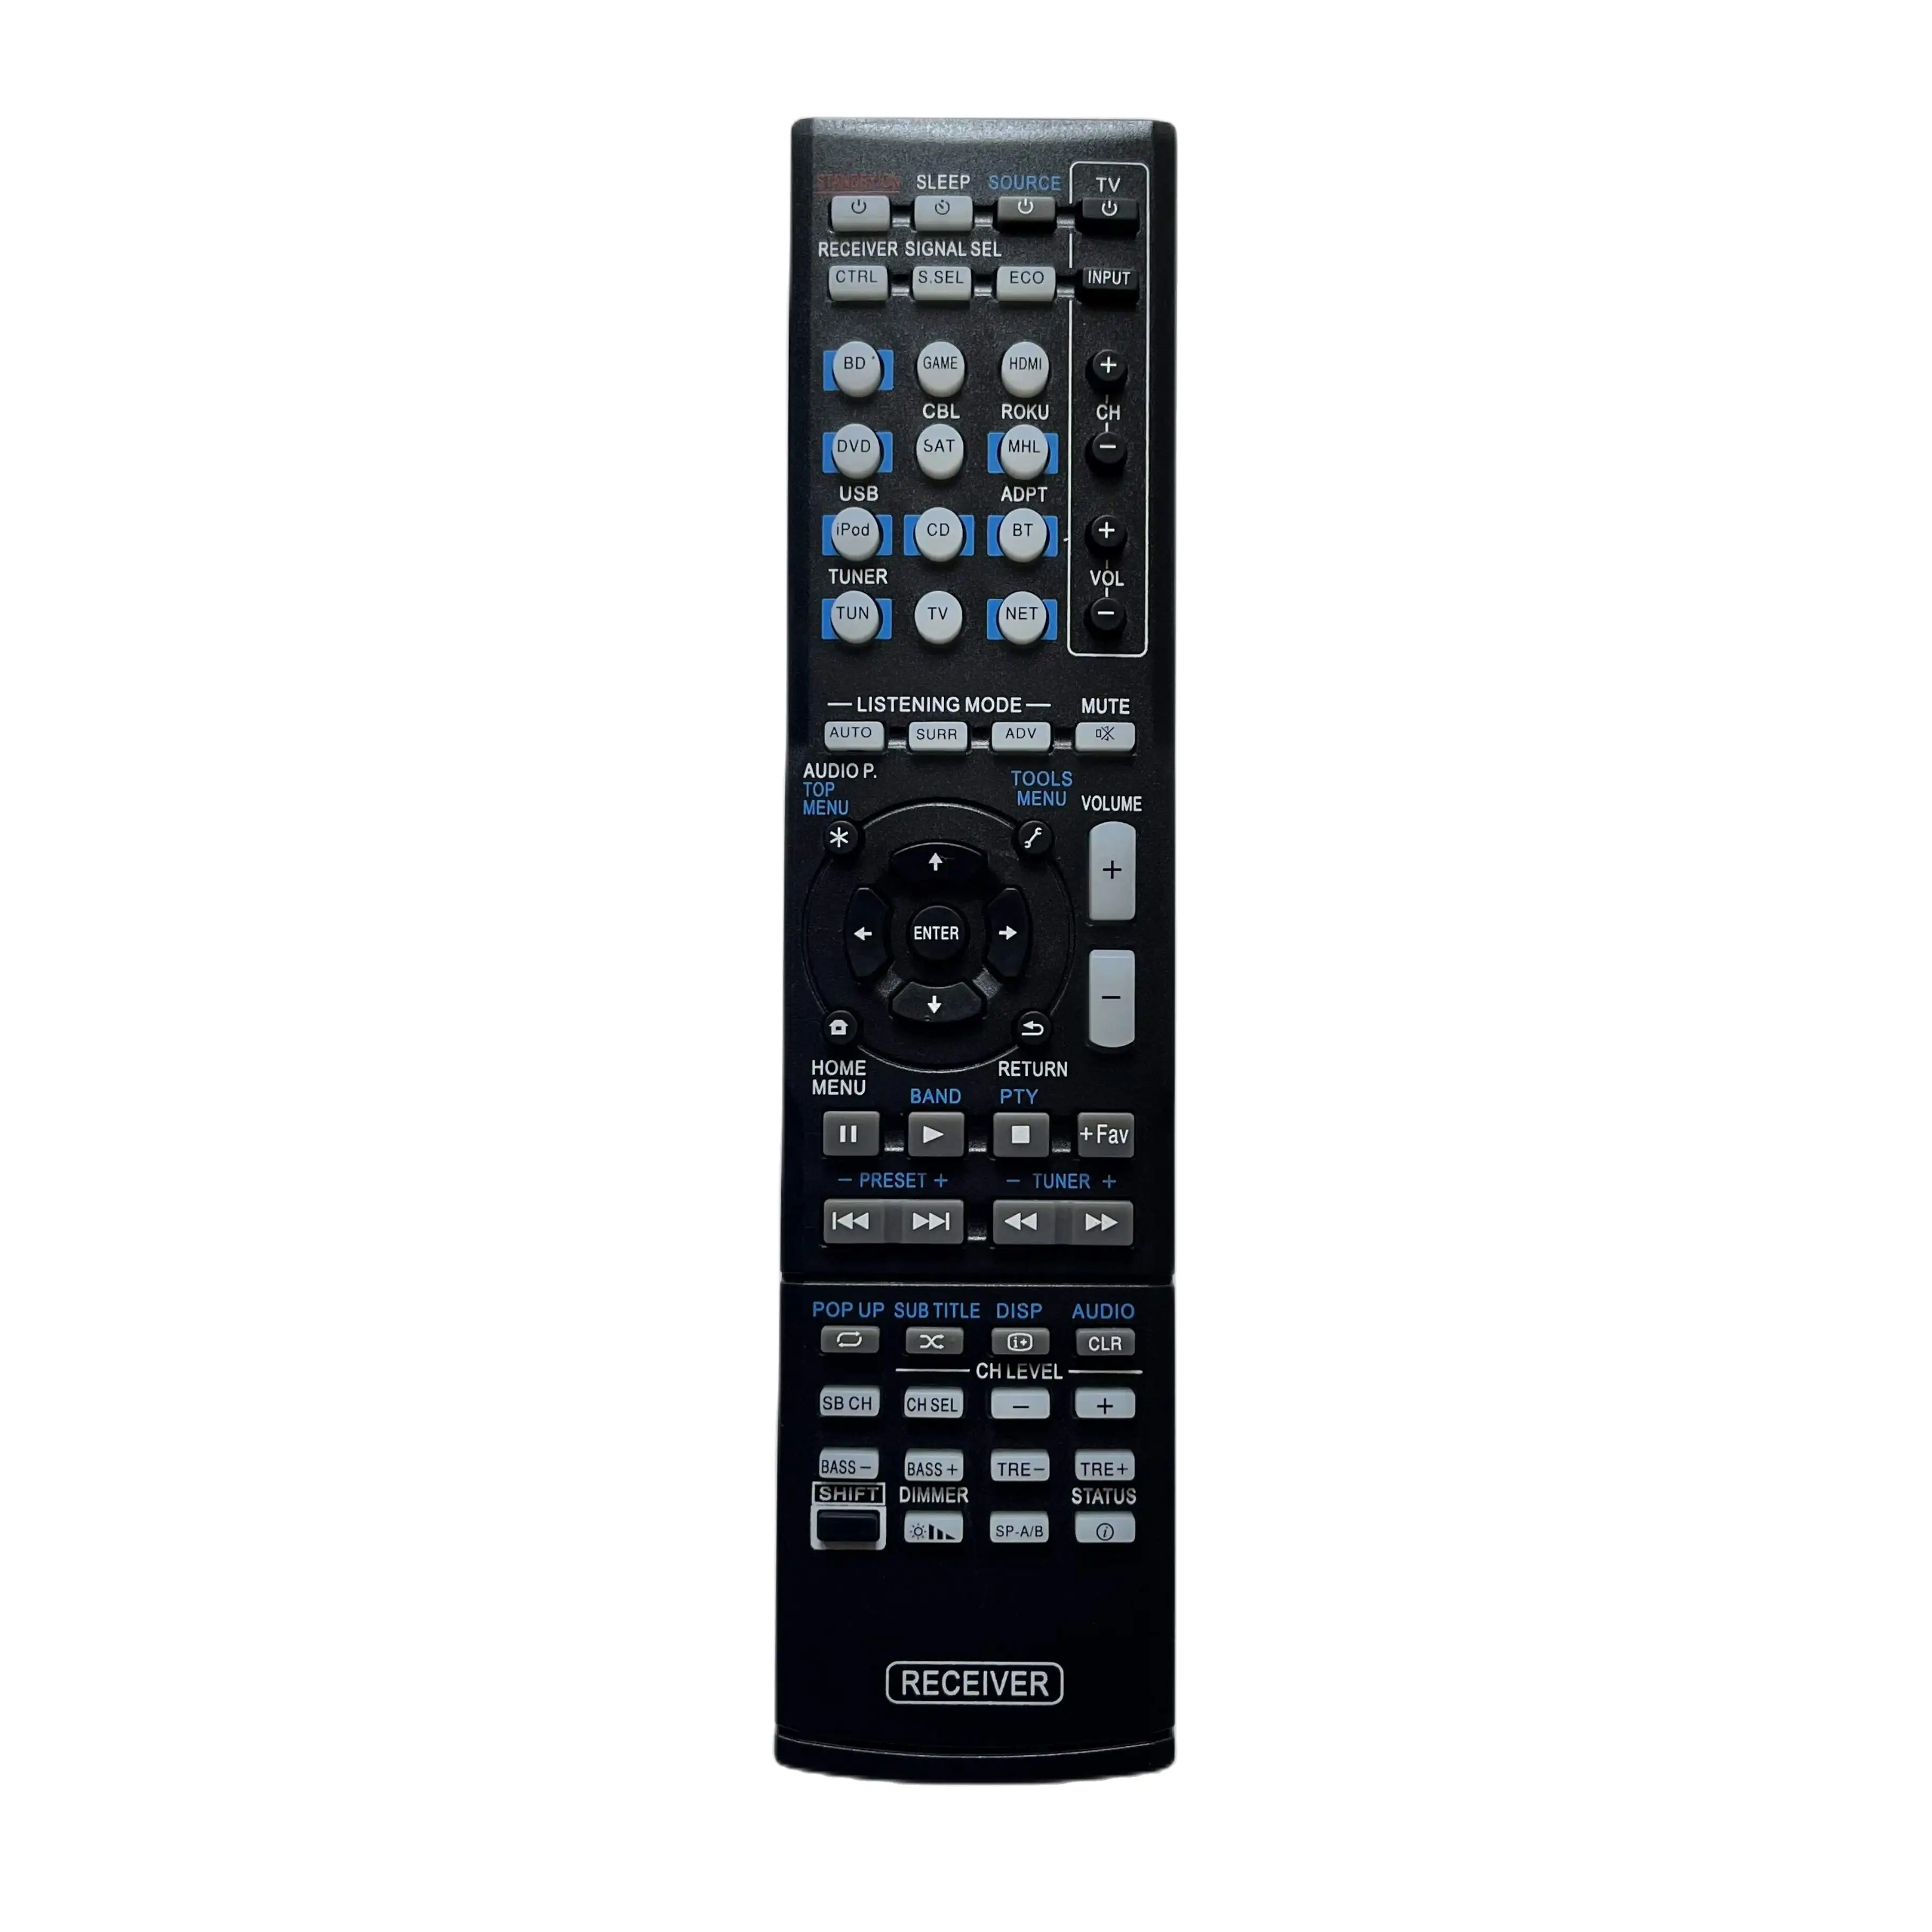 New Remote Control AXD7721 fit for Pioneer AV Receiver VSX-1024 VSX-1029 VSX-44 VSX-824 VSX-S300-K VSX-S310 VSX-530-K VSX-424-K